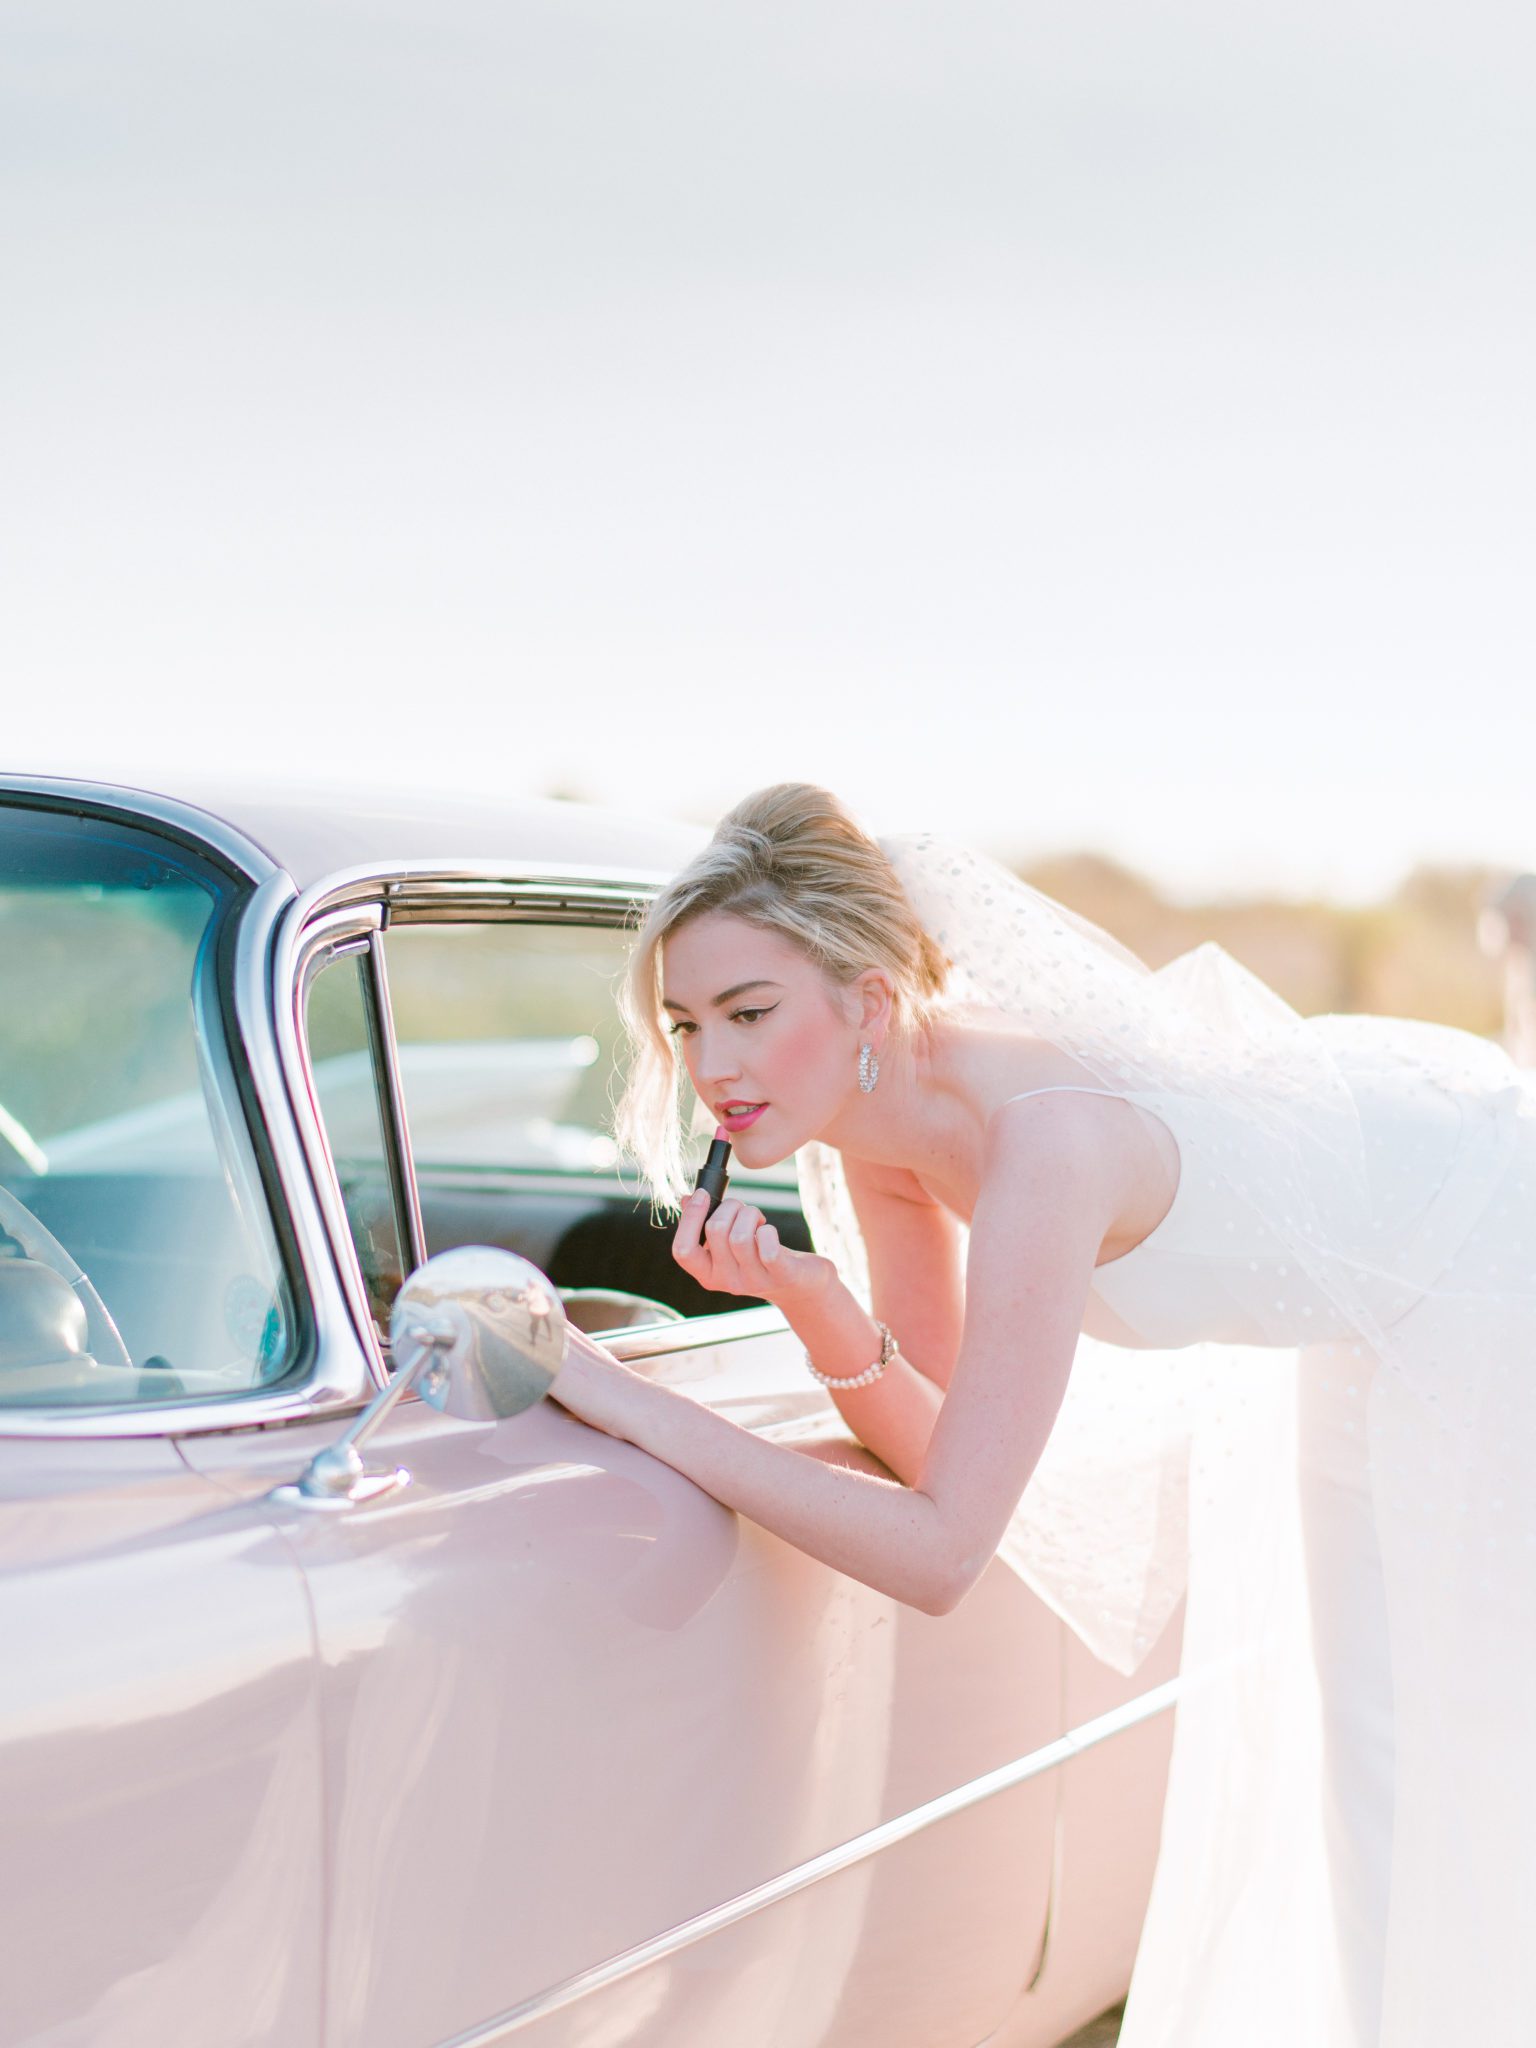 Makeup touchup for this retro bride featuring a pink Cadillac, retro inspired styled shoot in BC